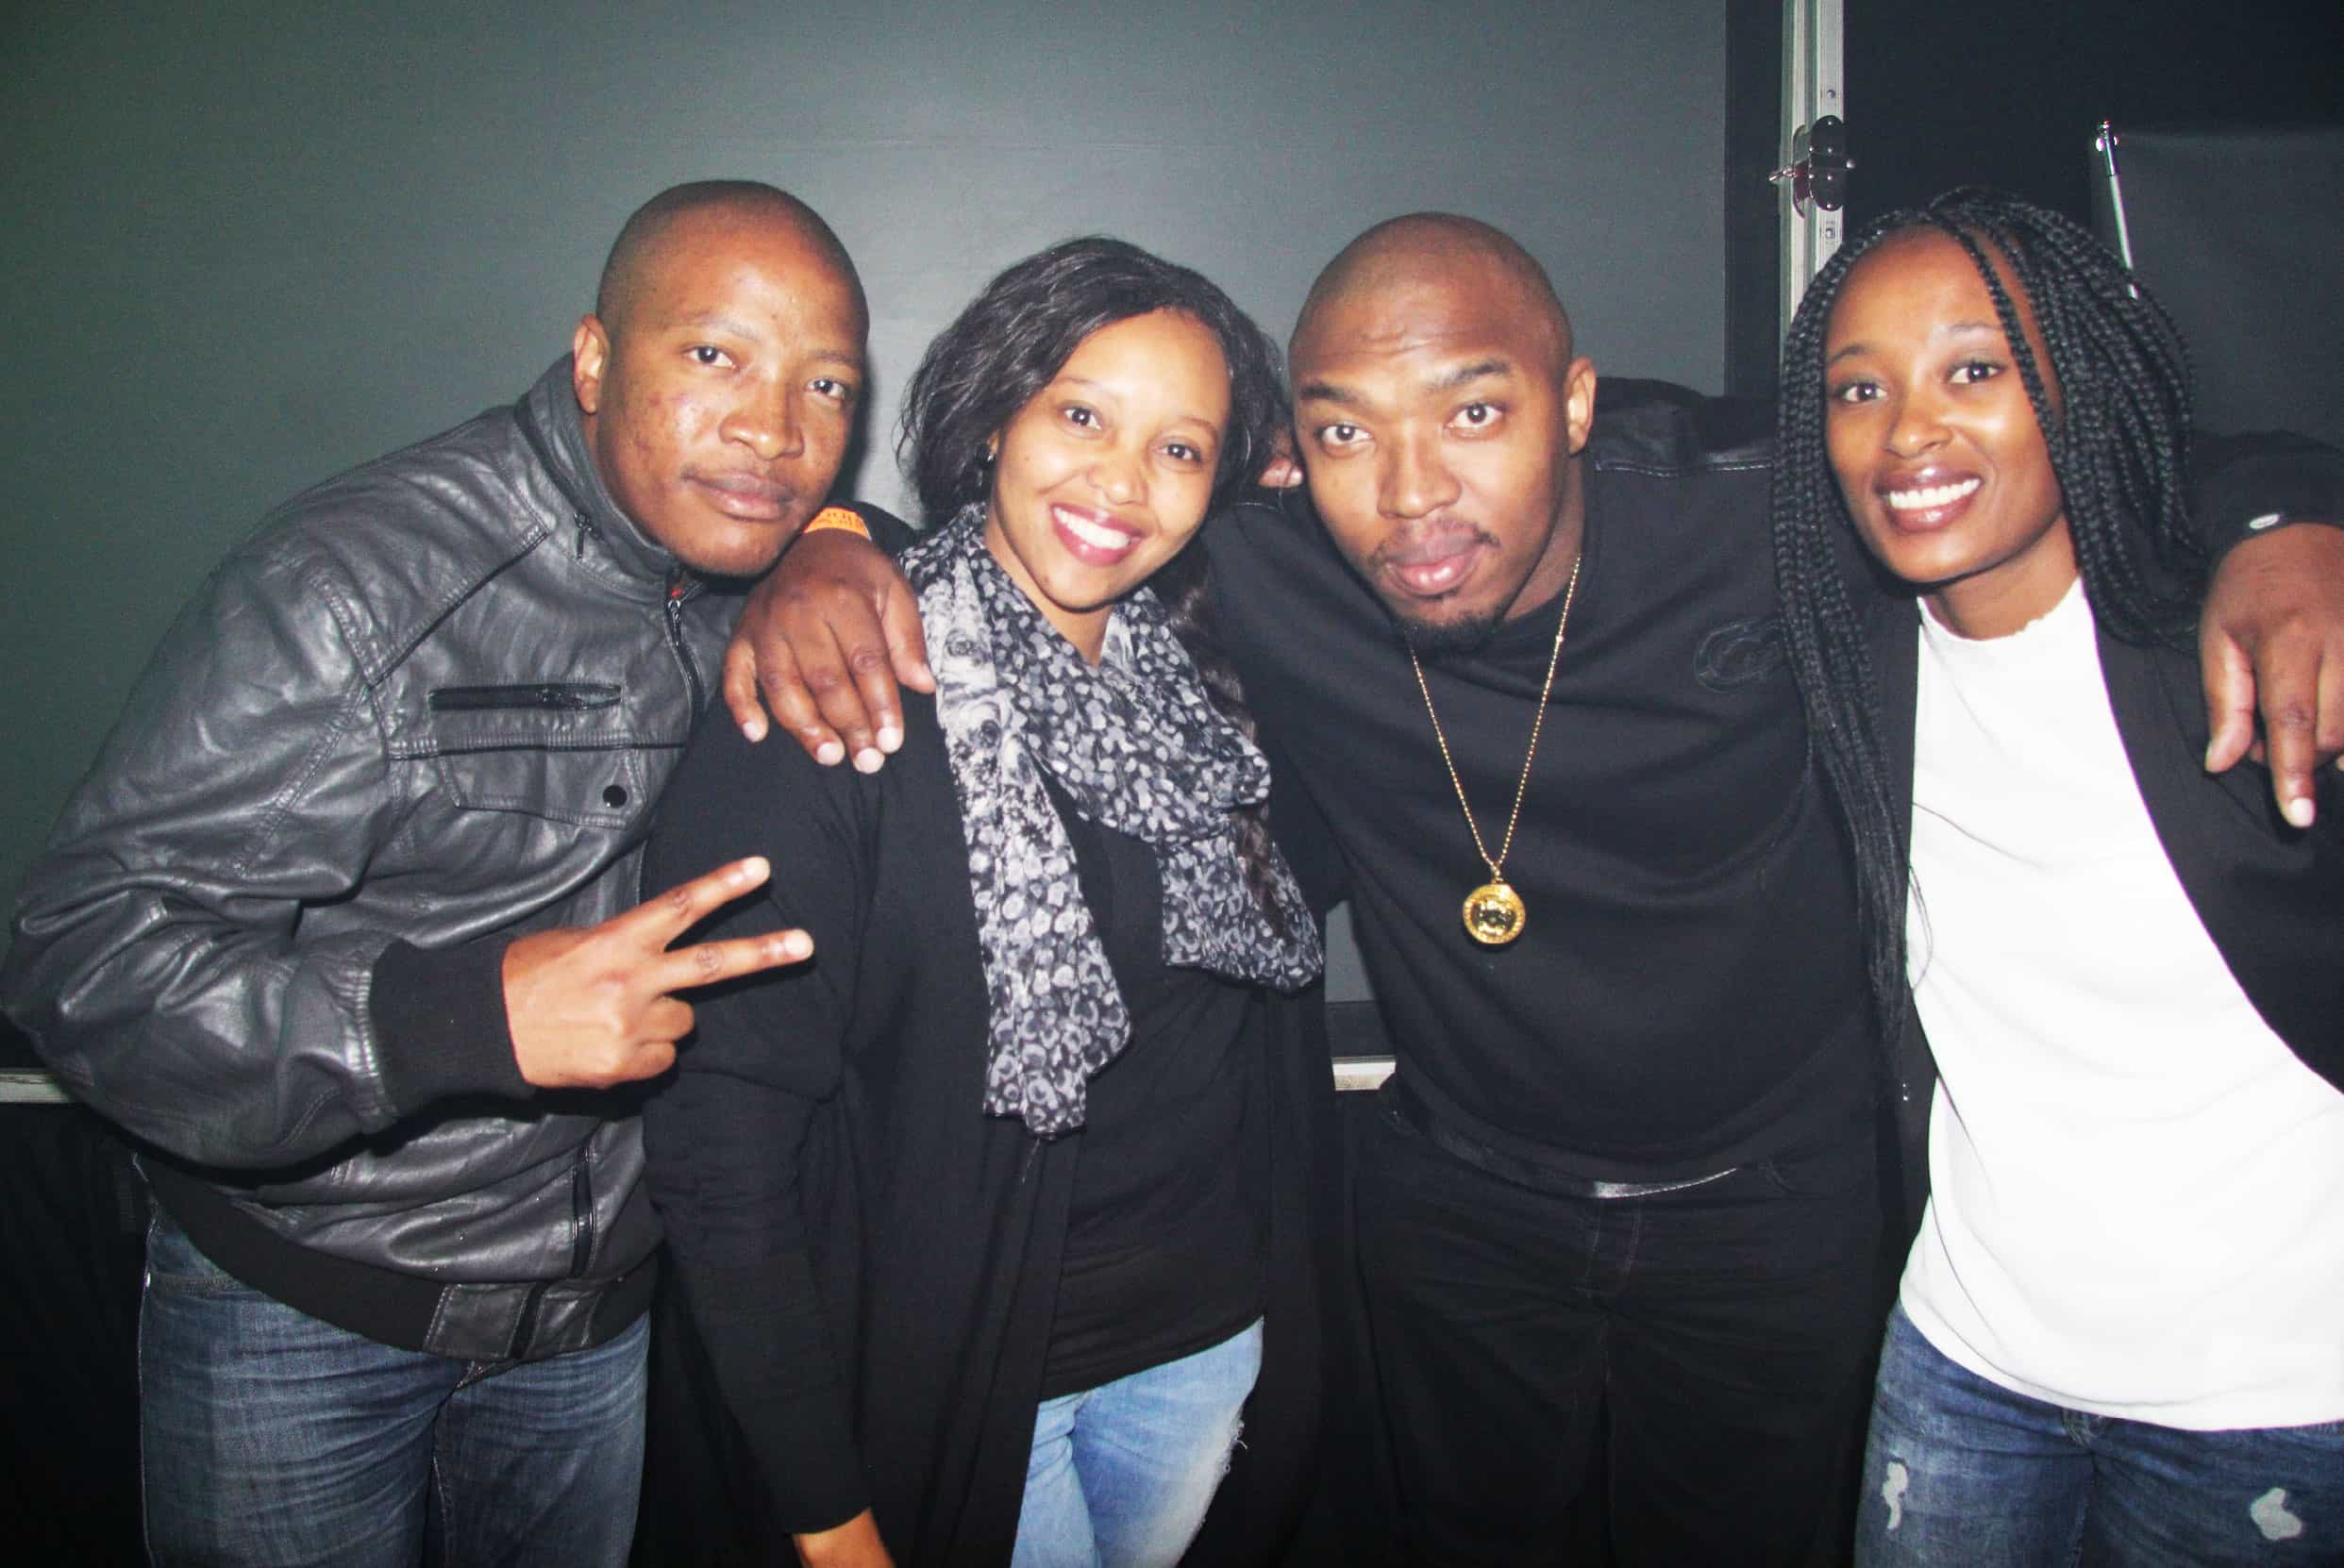 Afrotainment Night in Emalahleni